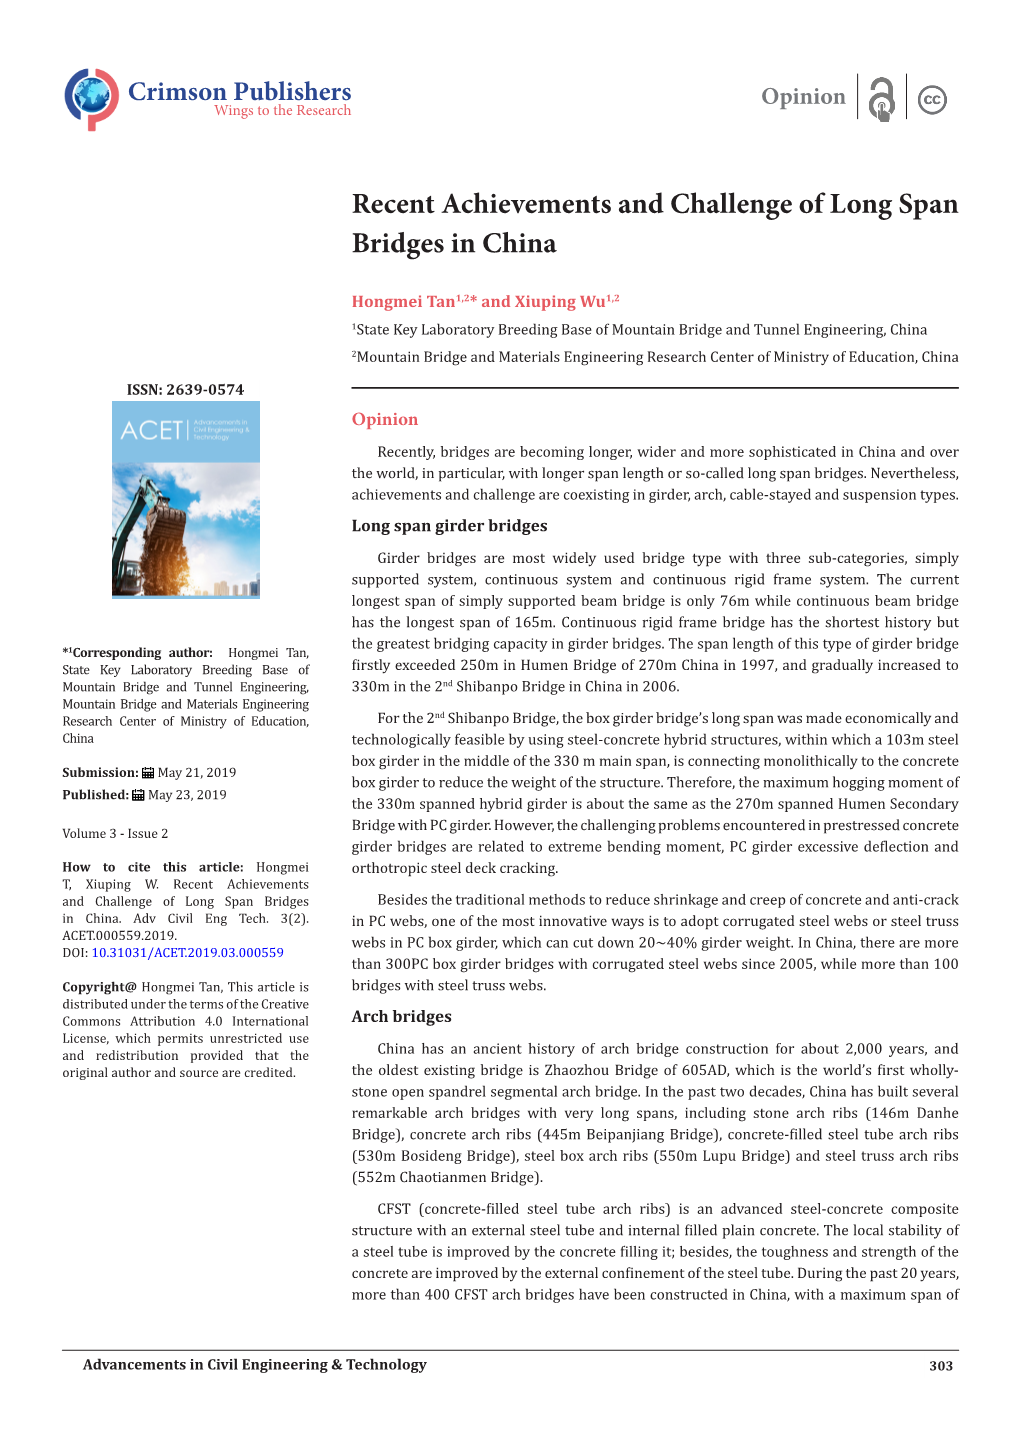 Recent Achievements and Challenge of Long Span Bridges in China